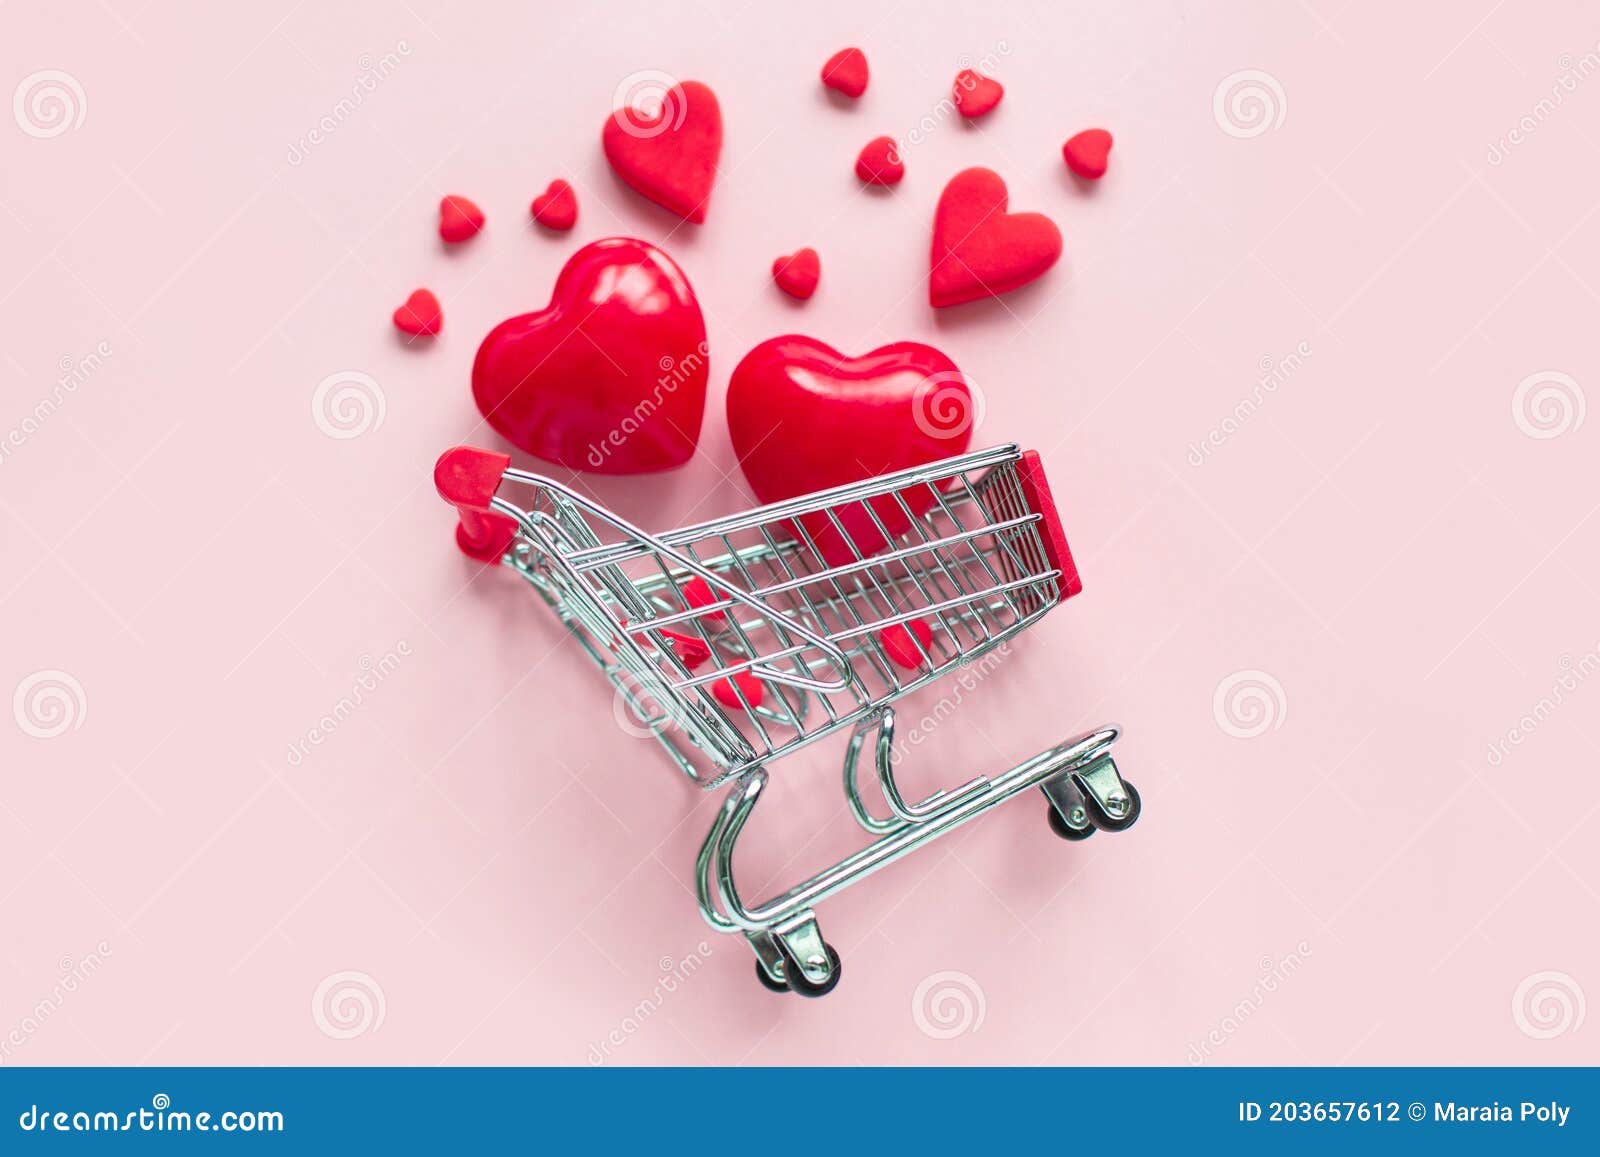 Valentine S Day Online Shopping. Shopping Cart with Hearts on a Pink  Background. Seasonal Holiday Sale. Romantic Shopping for Stock Photo -  Image of wedding, marketing: 203657612